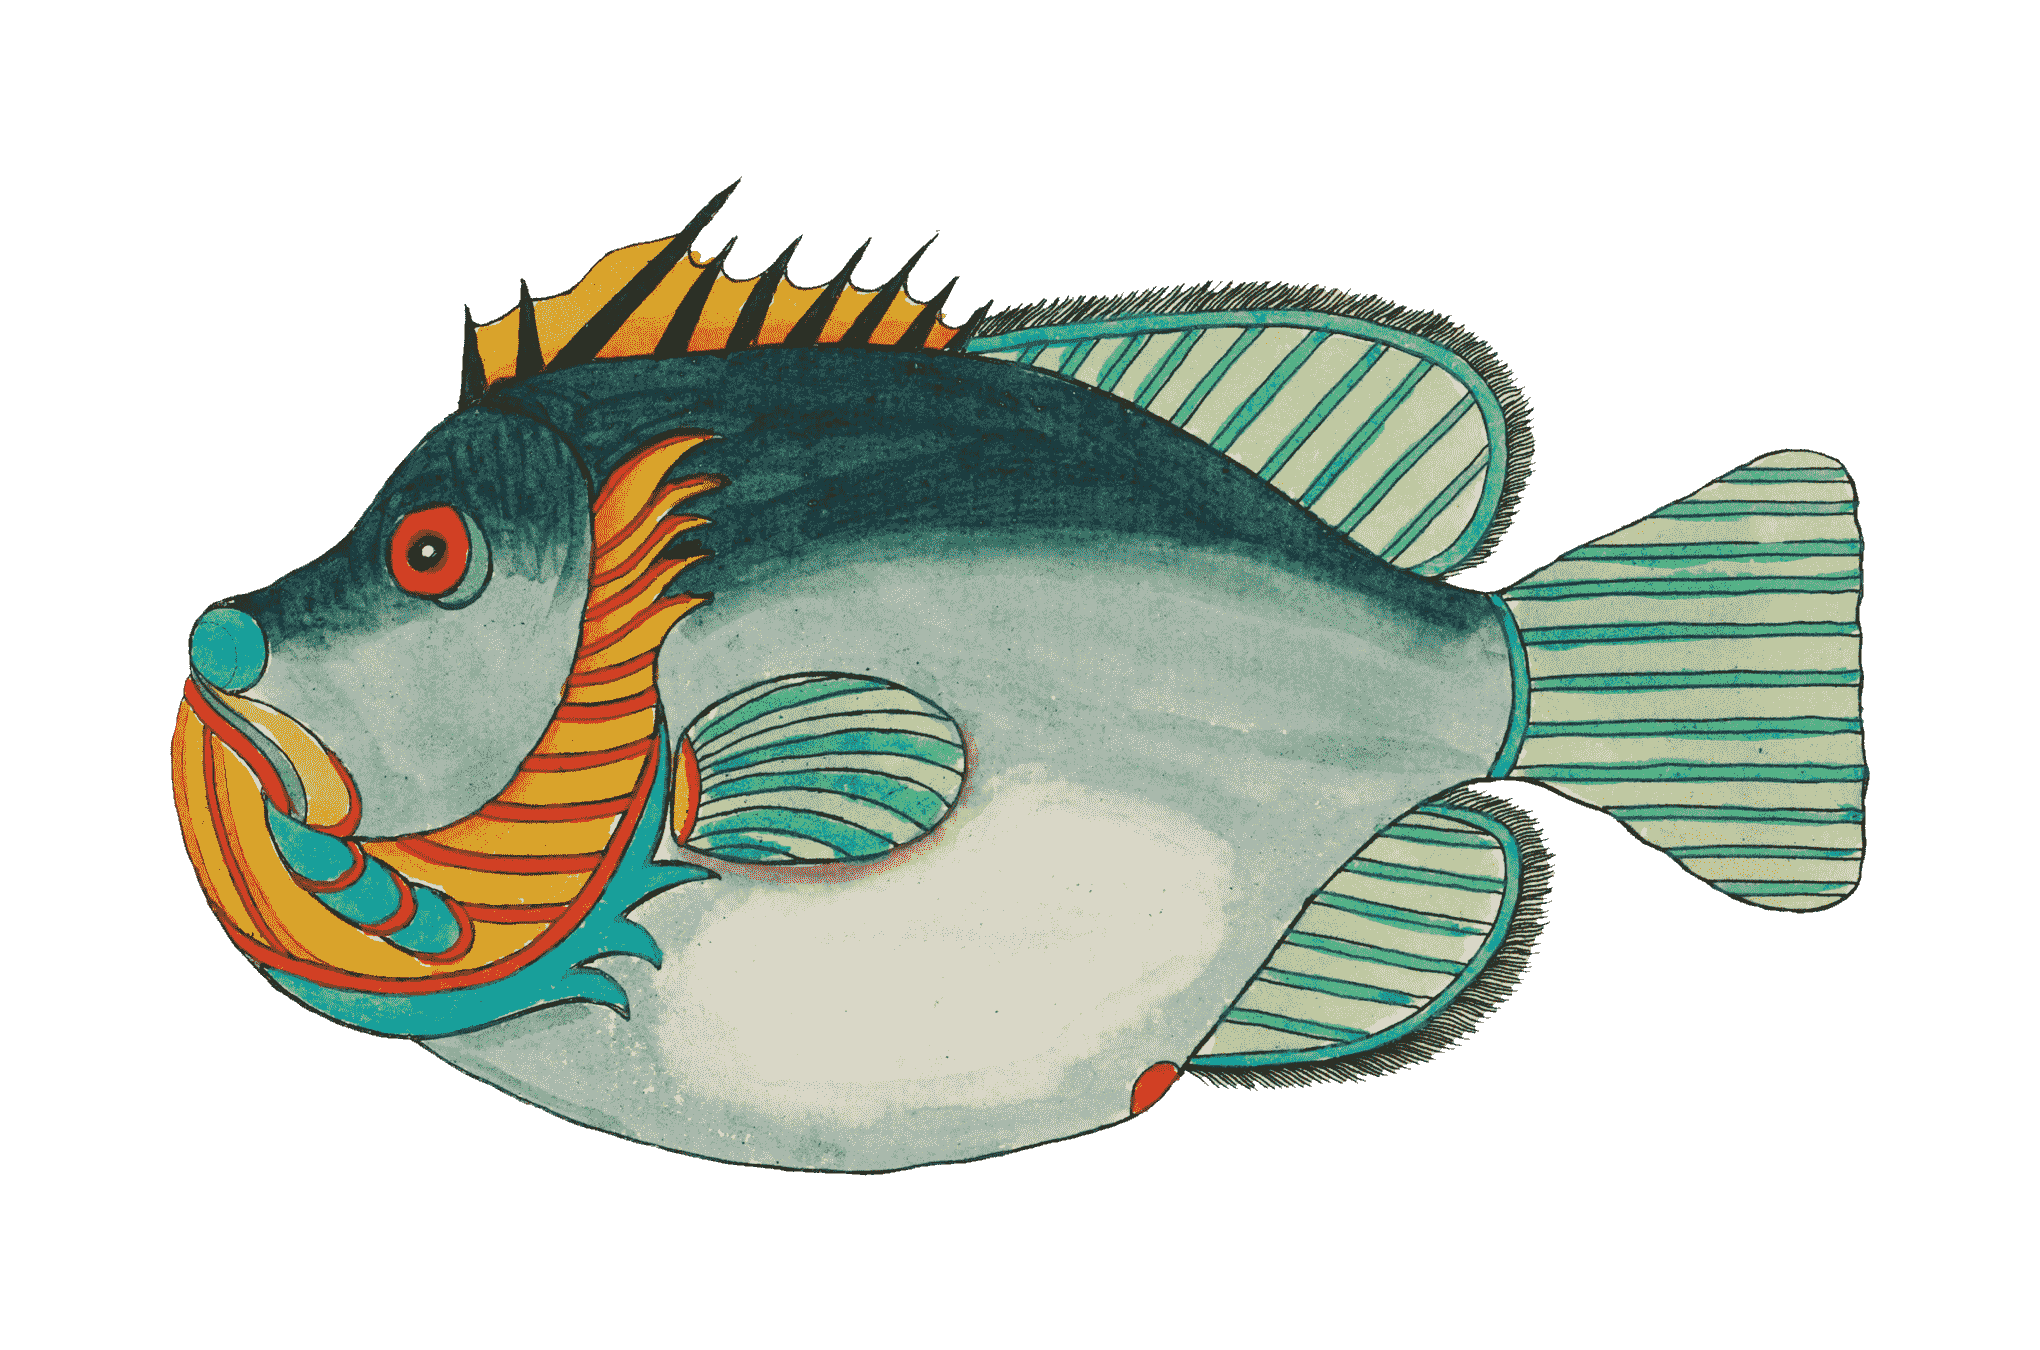 vintage fish illustration from rawpixel